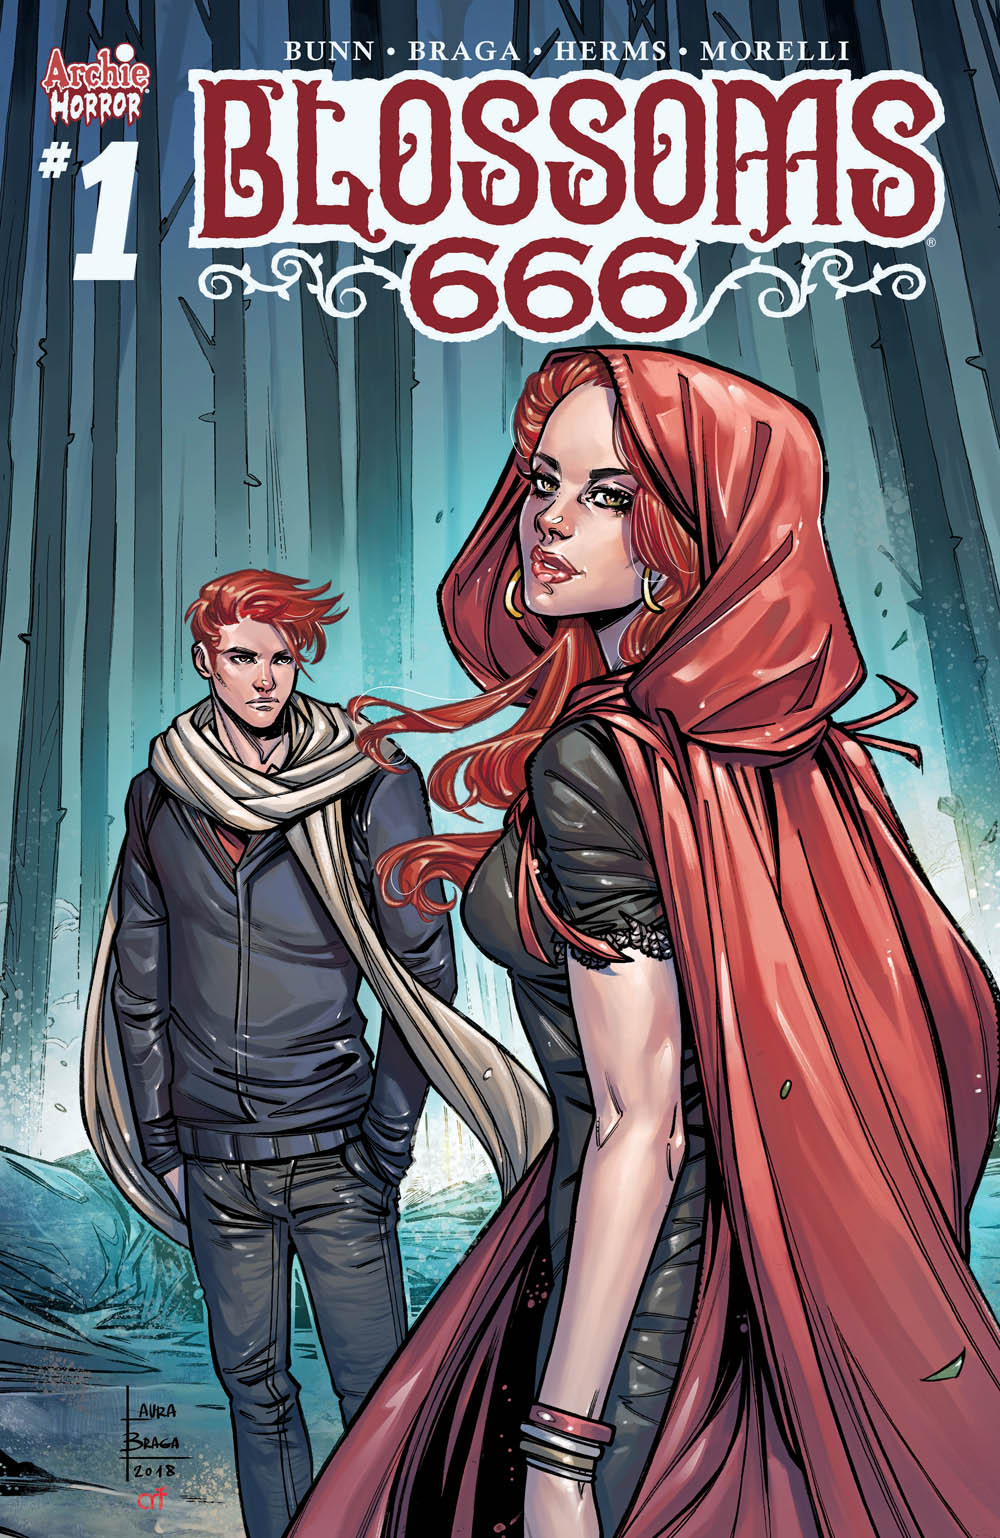 Evil is in bloom in a new Archie Horror series, BLOSSOMS 666 - Archie